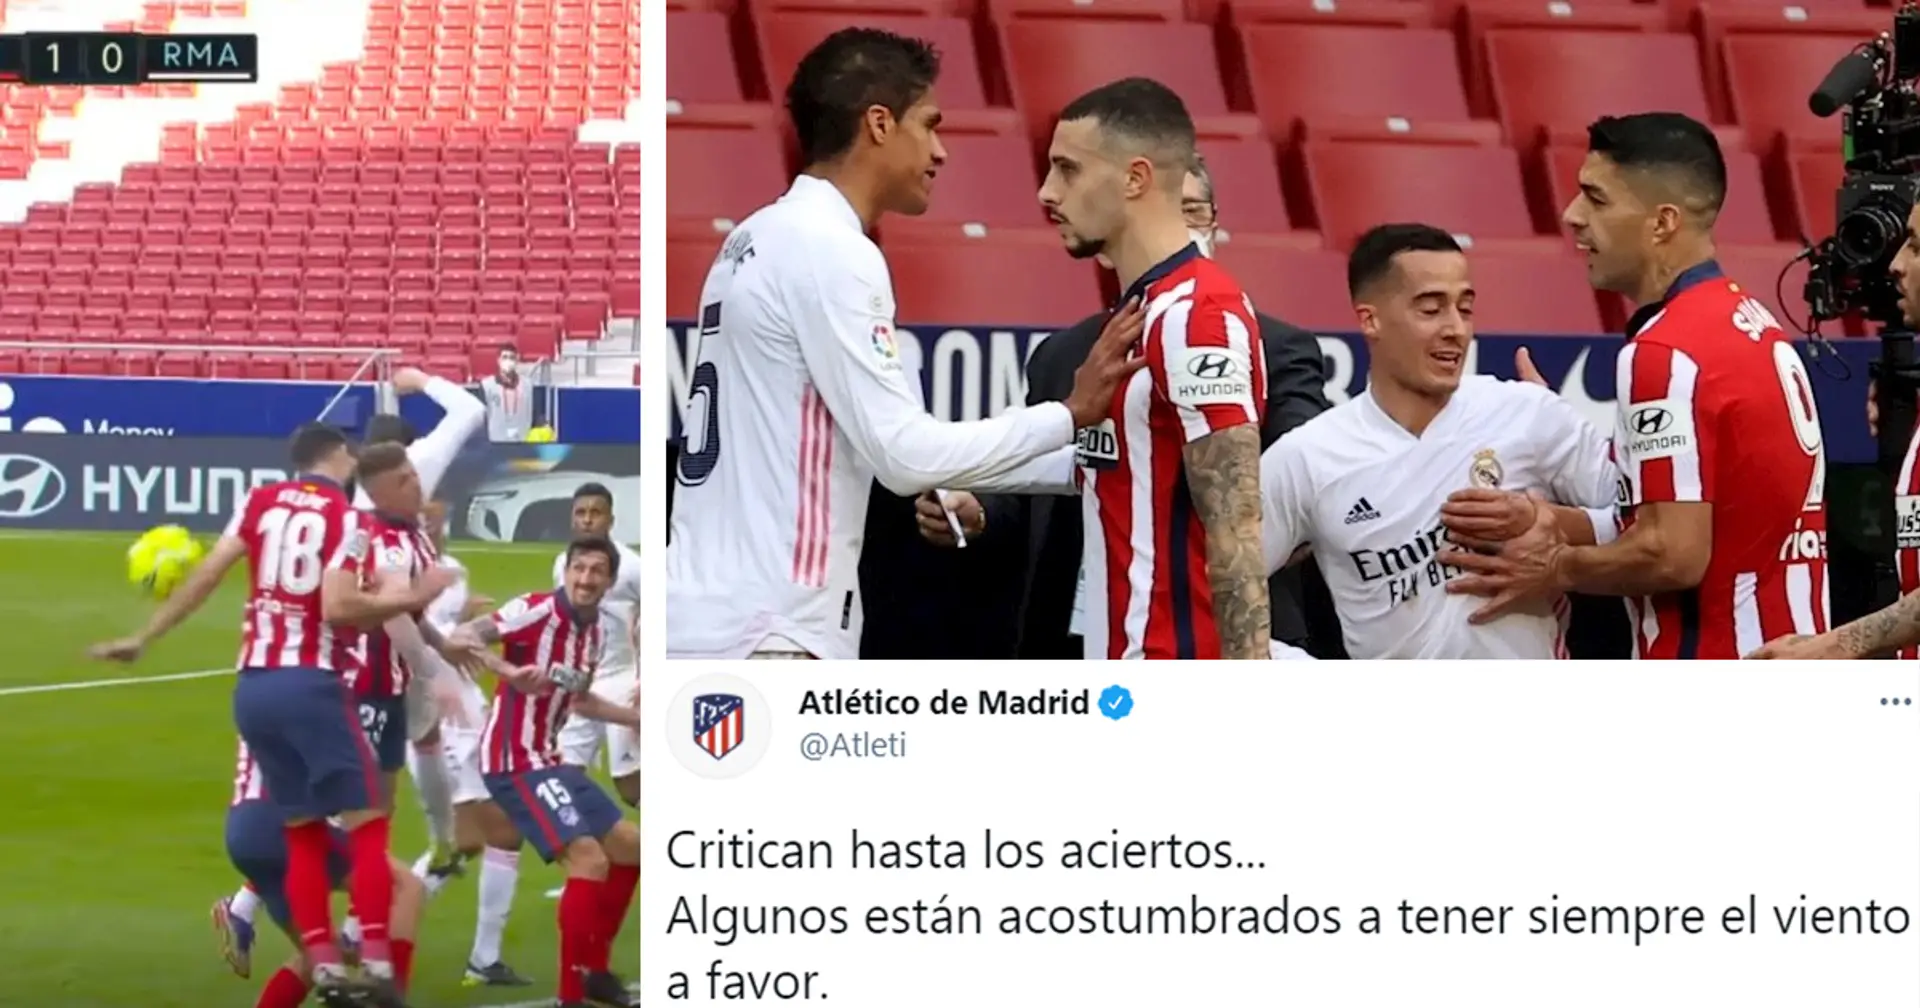 'Some are used to wind blowing in their favour': Atletico make outrageous Real Madrid insinuation via Twitter